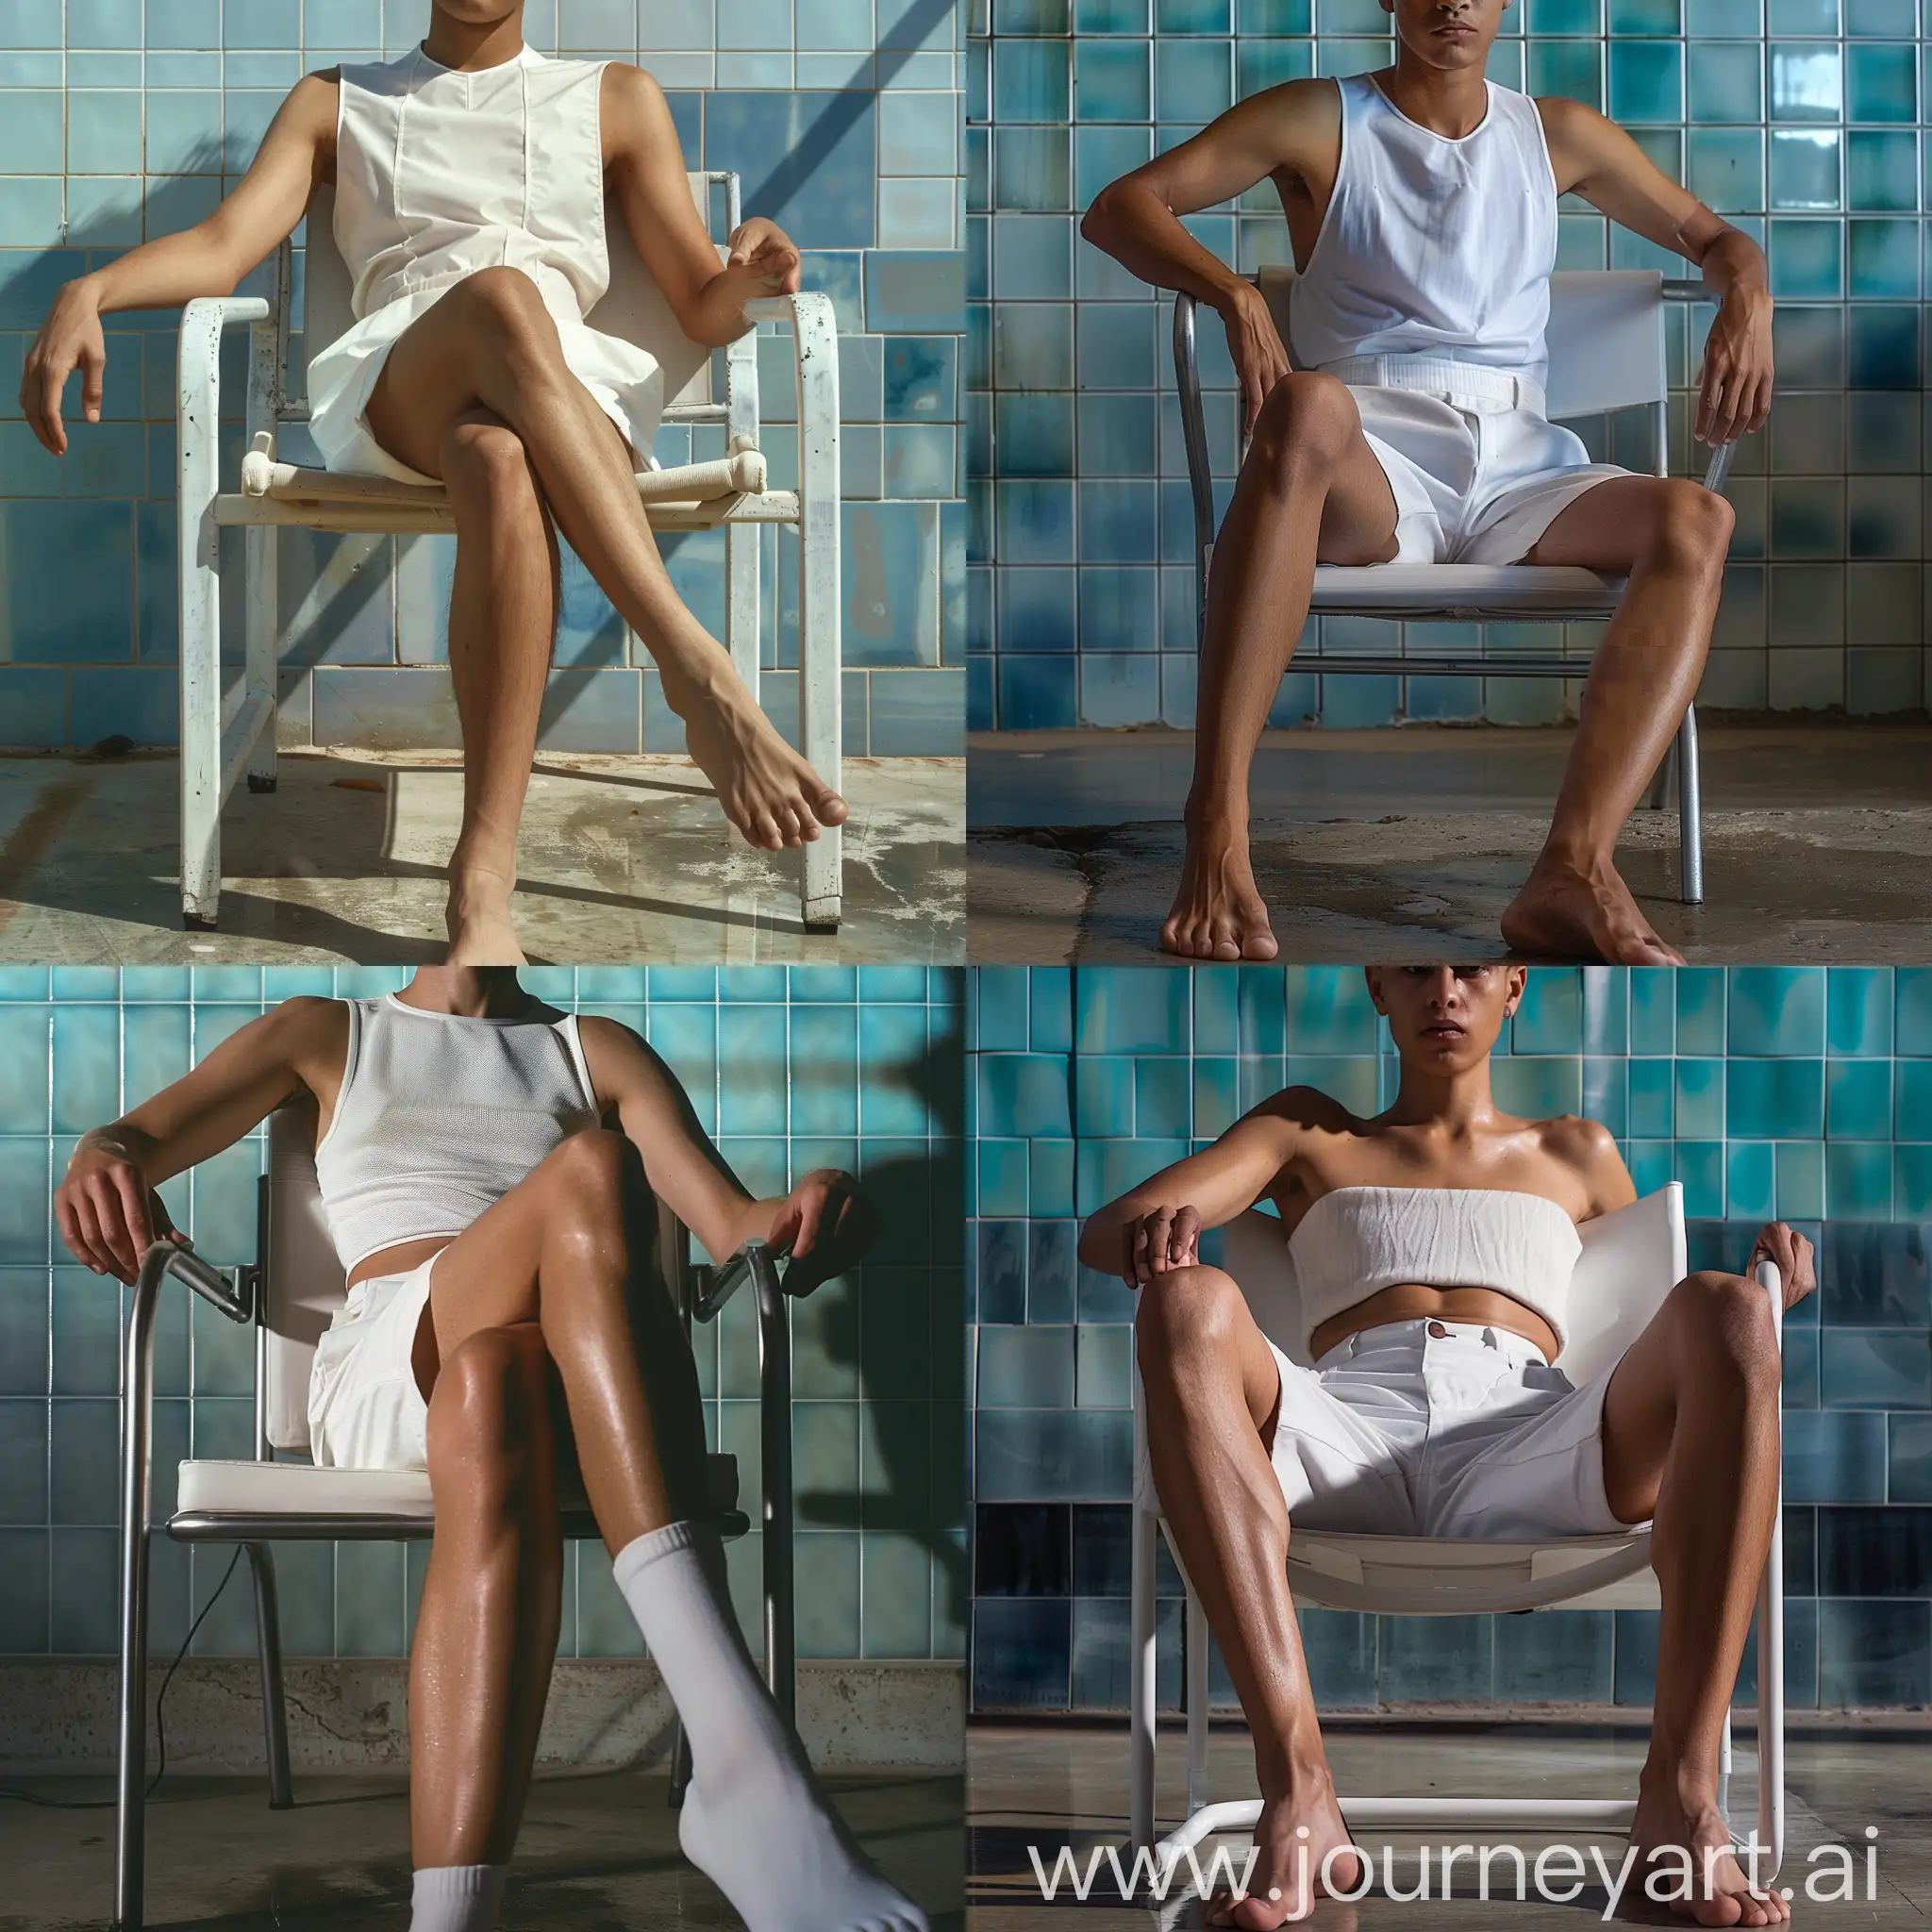 Confident-Individual-Relaxing-on-Metal-Chair-in-Cool-Blue-Setting